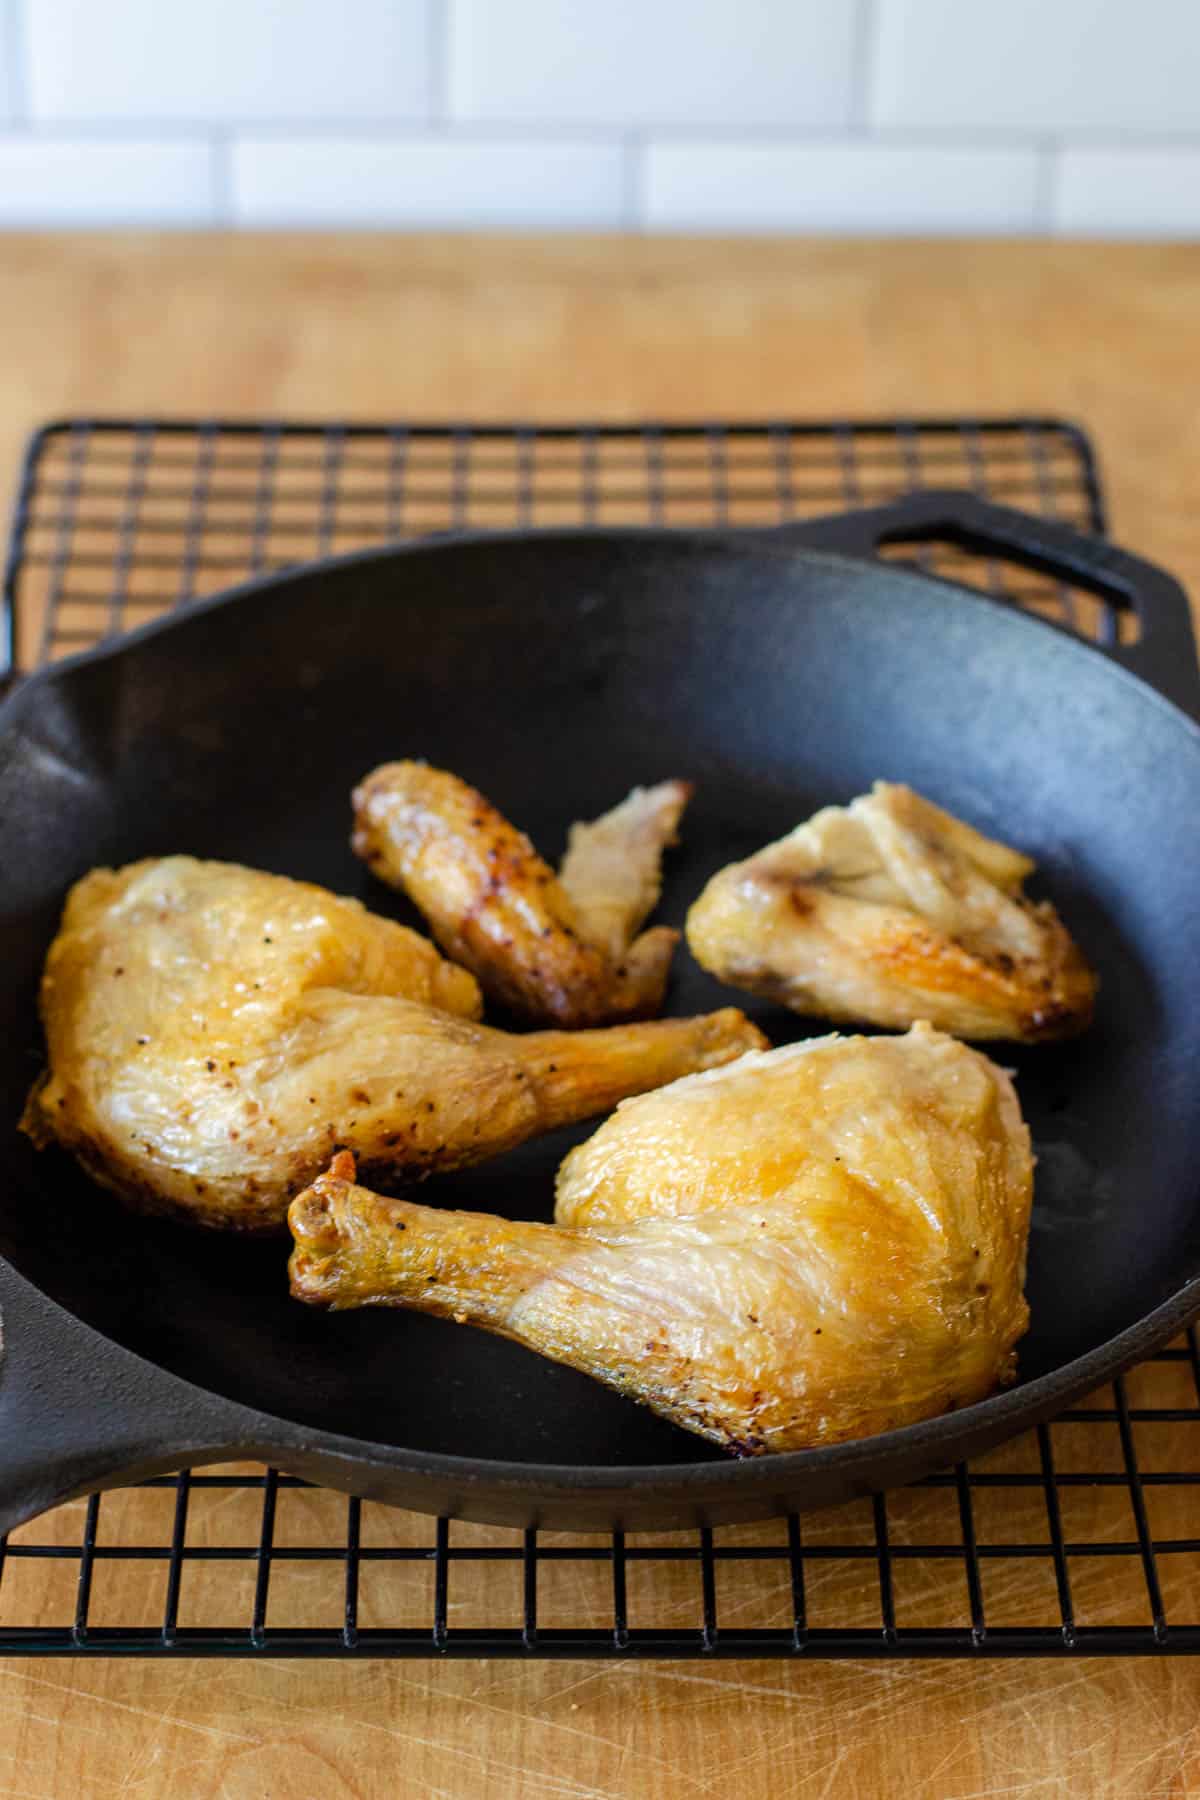 Chicken pieces in cast iron skillet on cooling rack